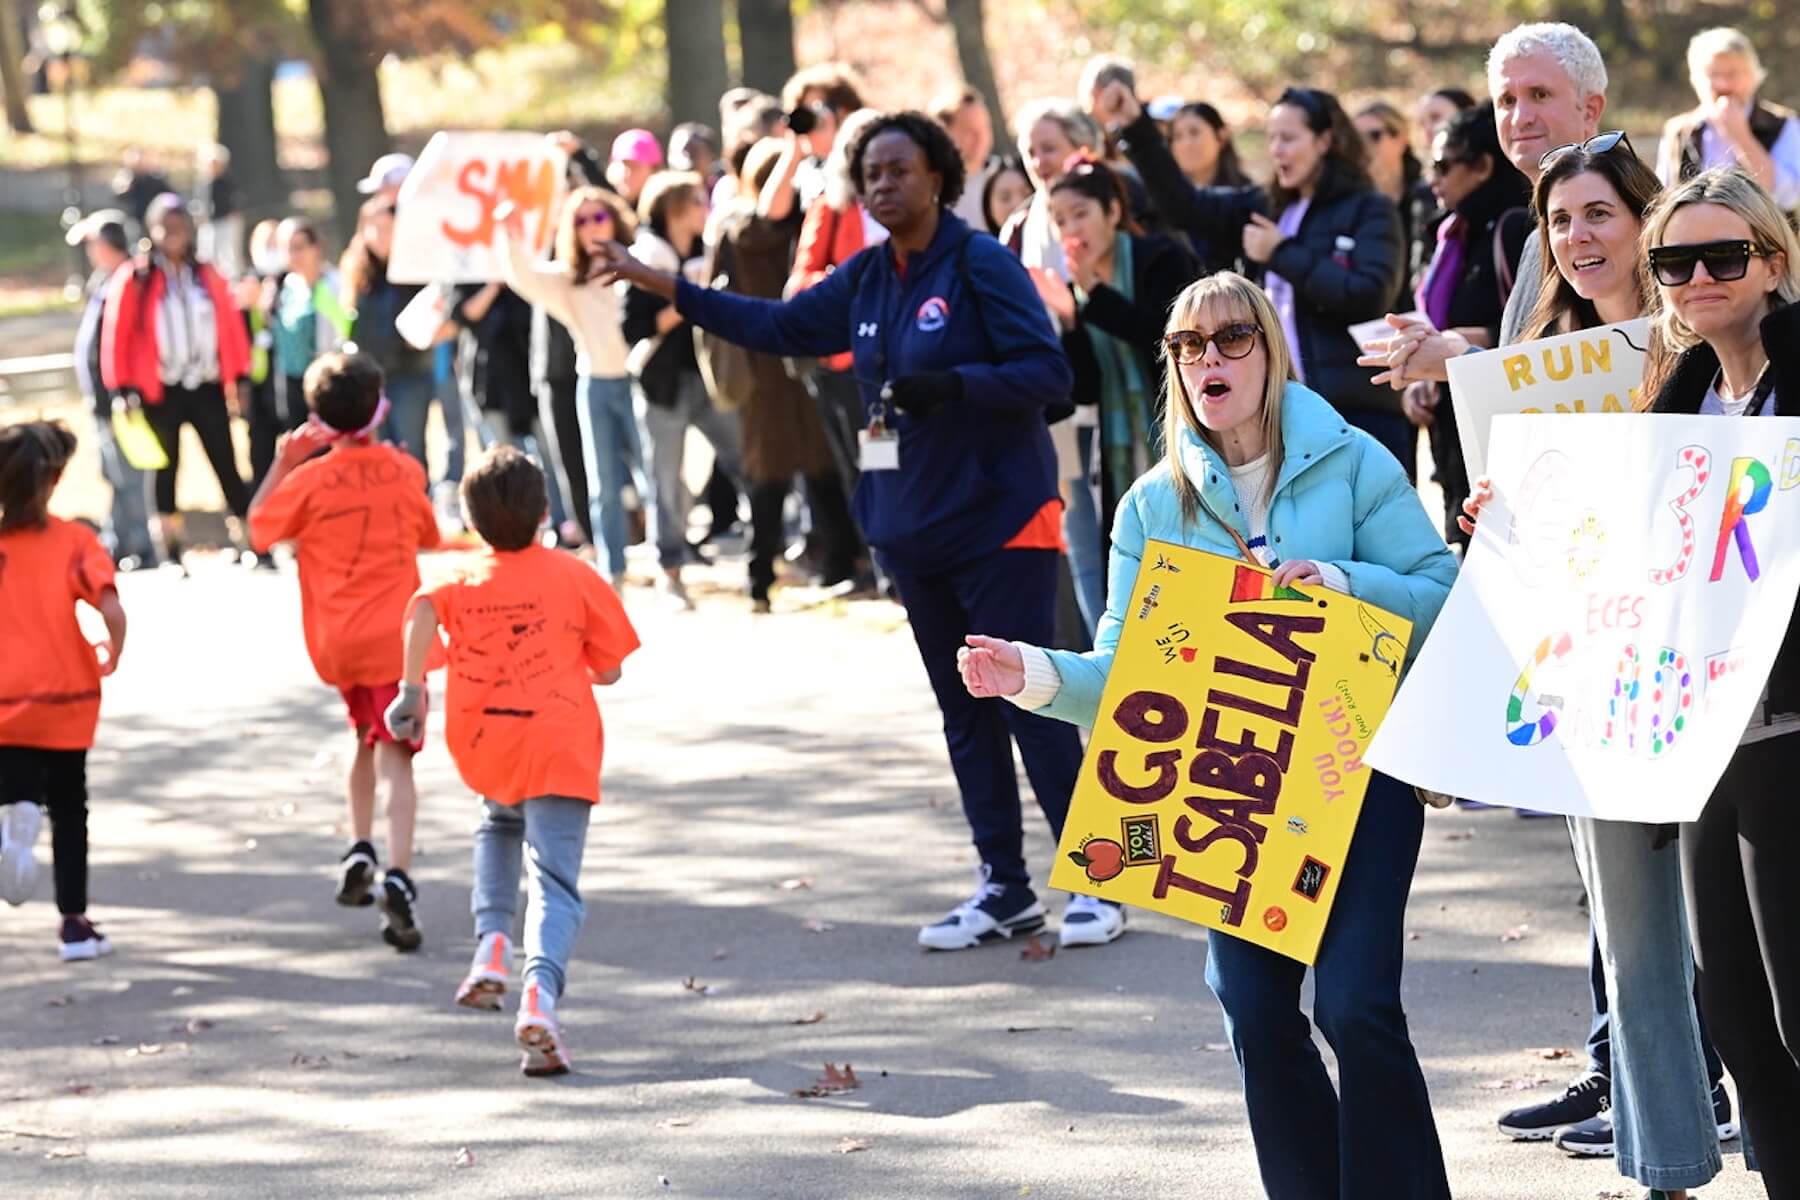 Families cheer on Ethical Culture students with signs as they run in Central Park.